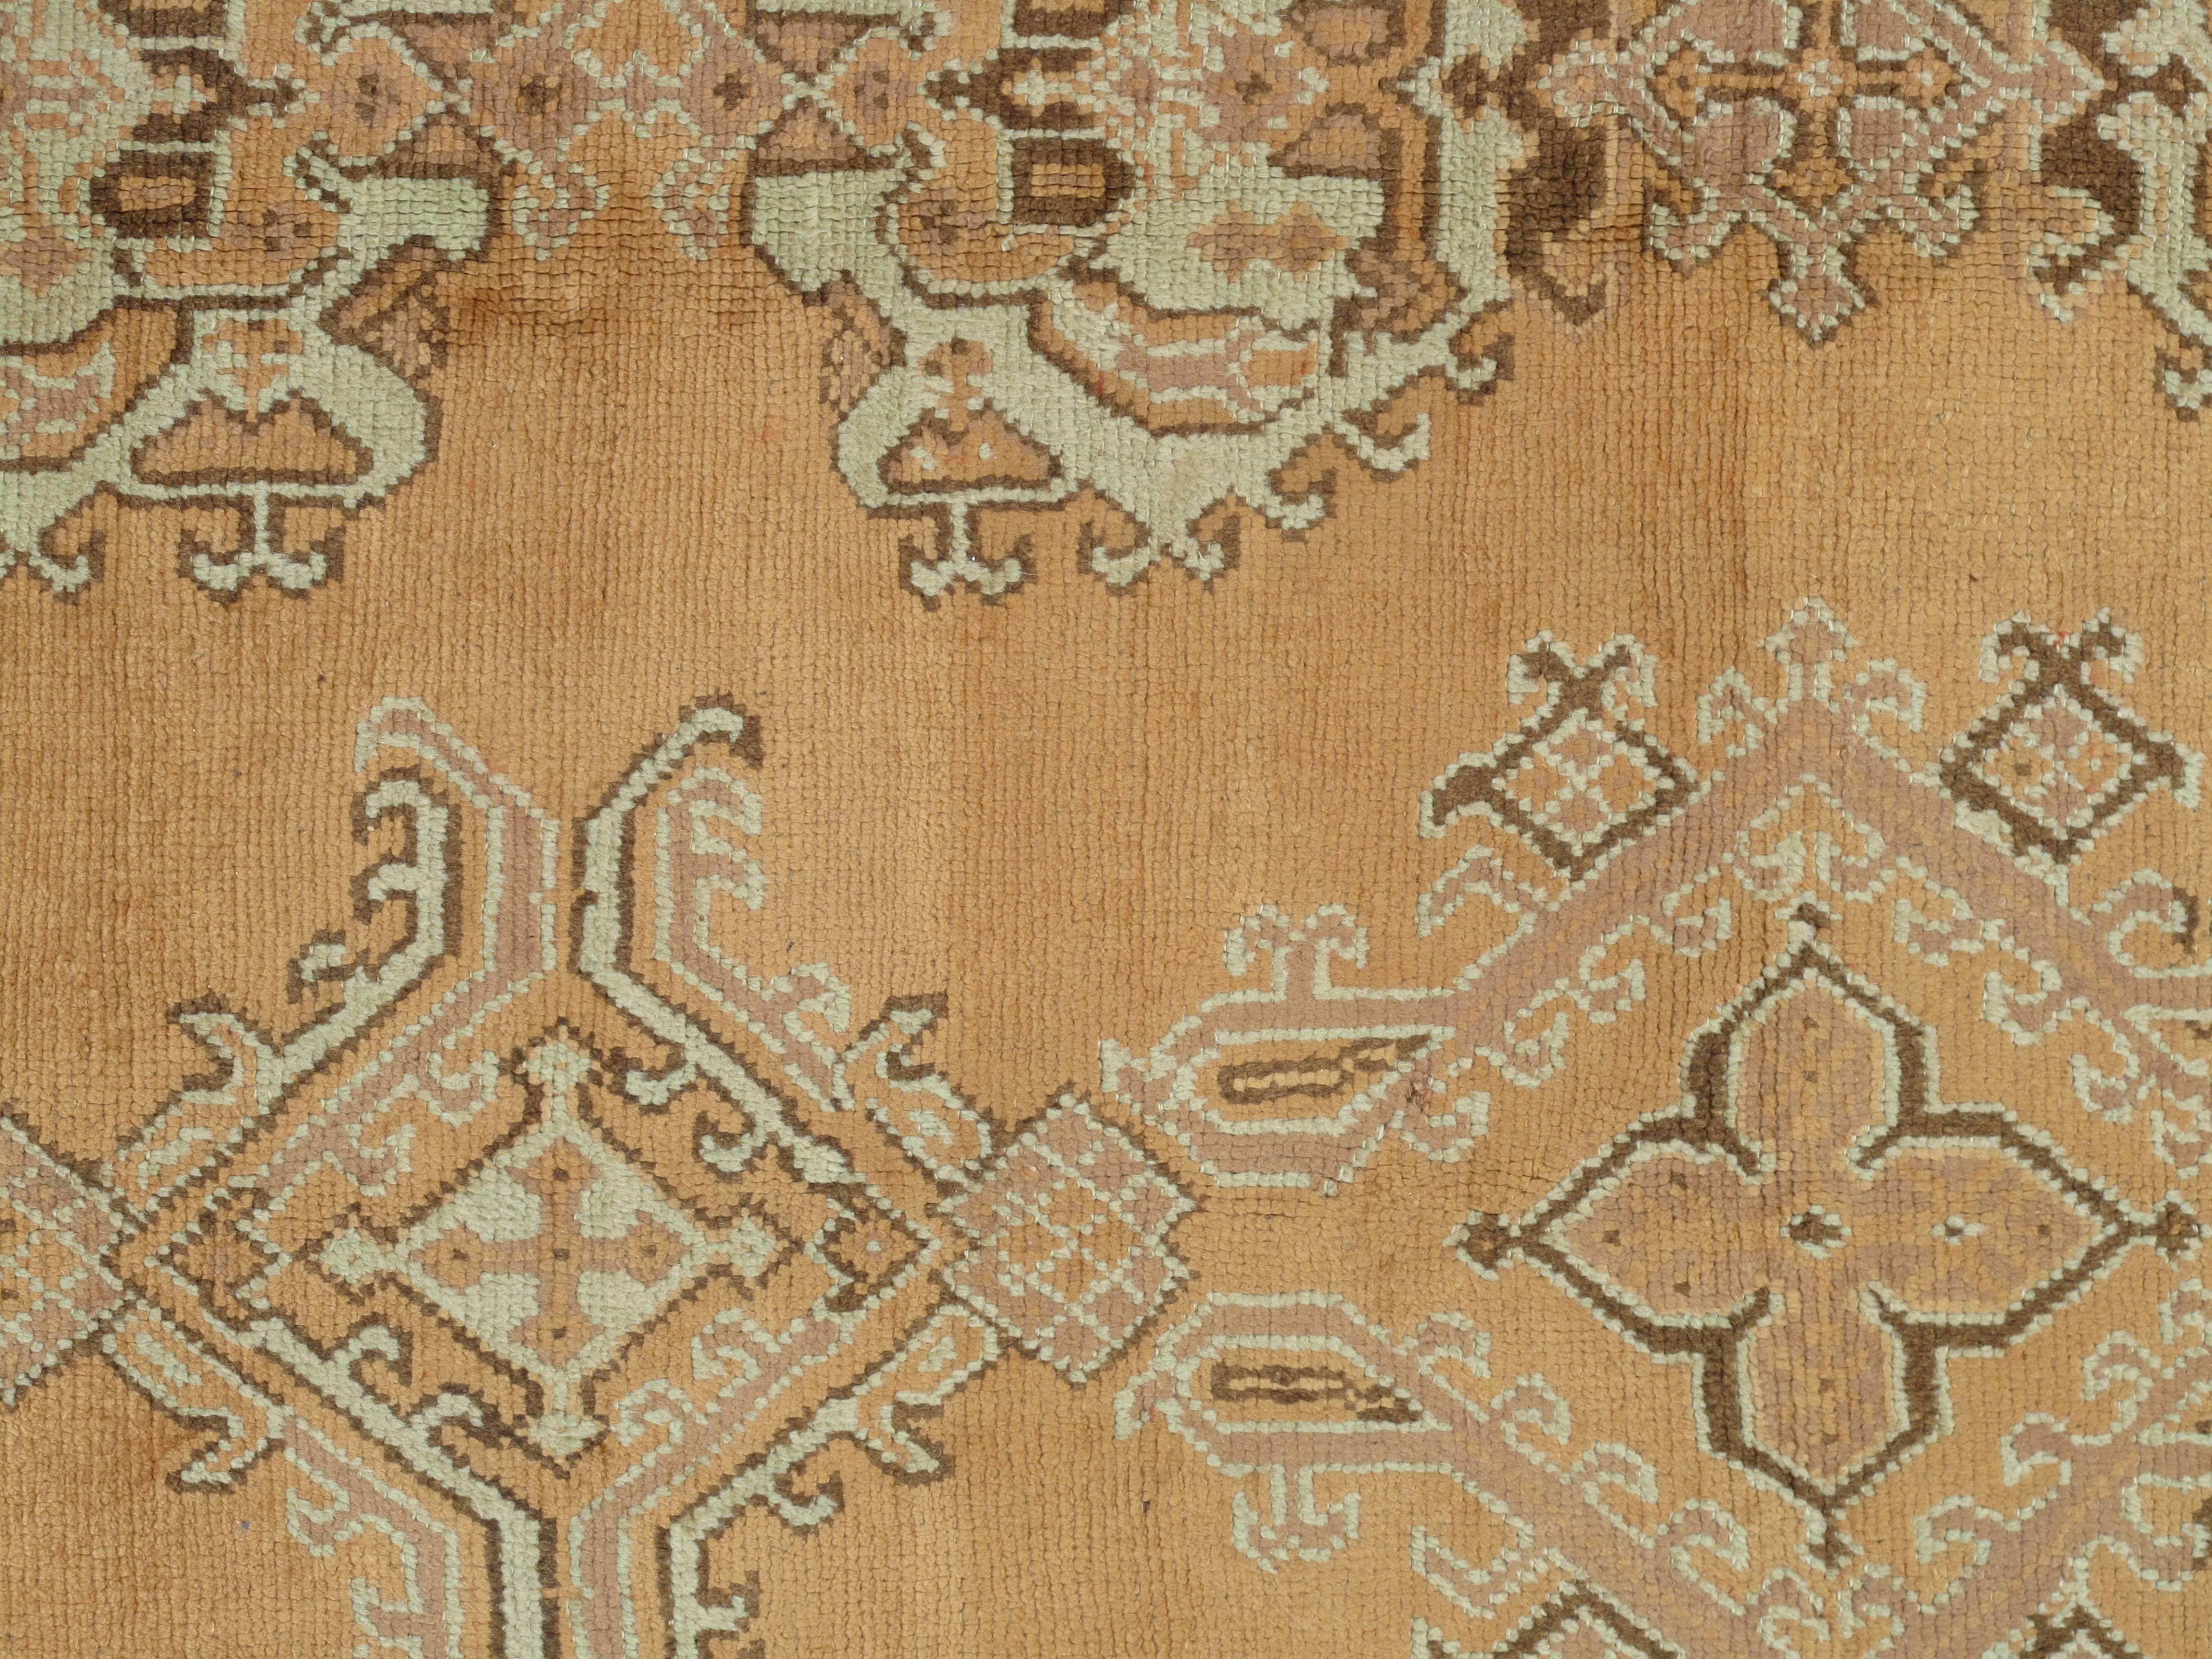 The town of Oushak first emerged as a center for the production of Ottoman Turkish court carpets from the end of the fifteenth century. Like these forerunners, the antique Oushak carpets woven in Western Turkey in the later nineteenth and early